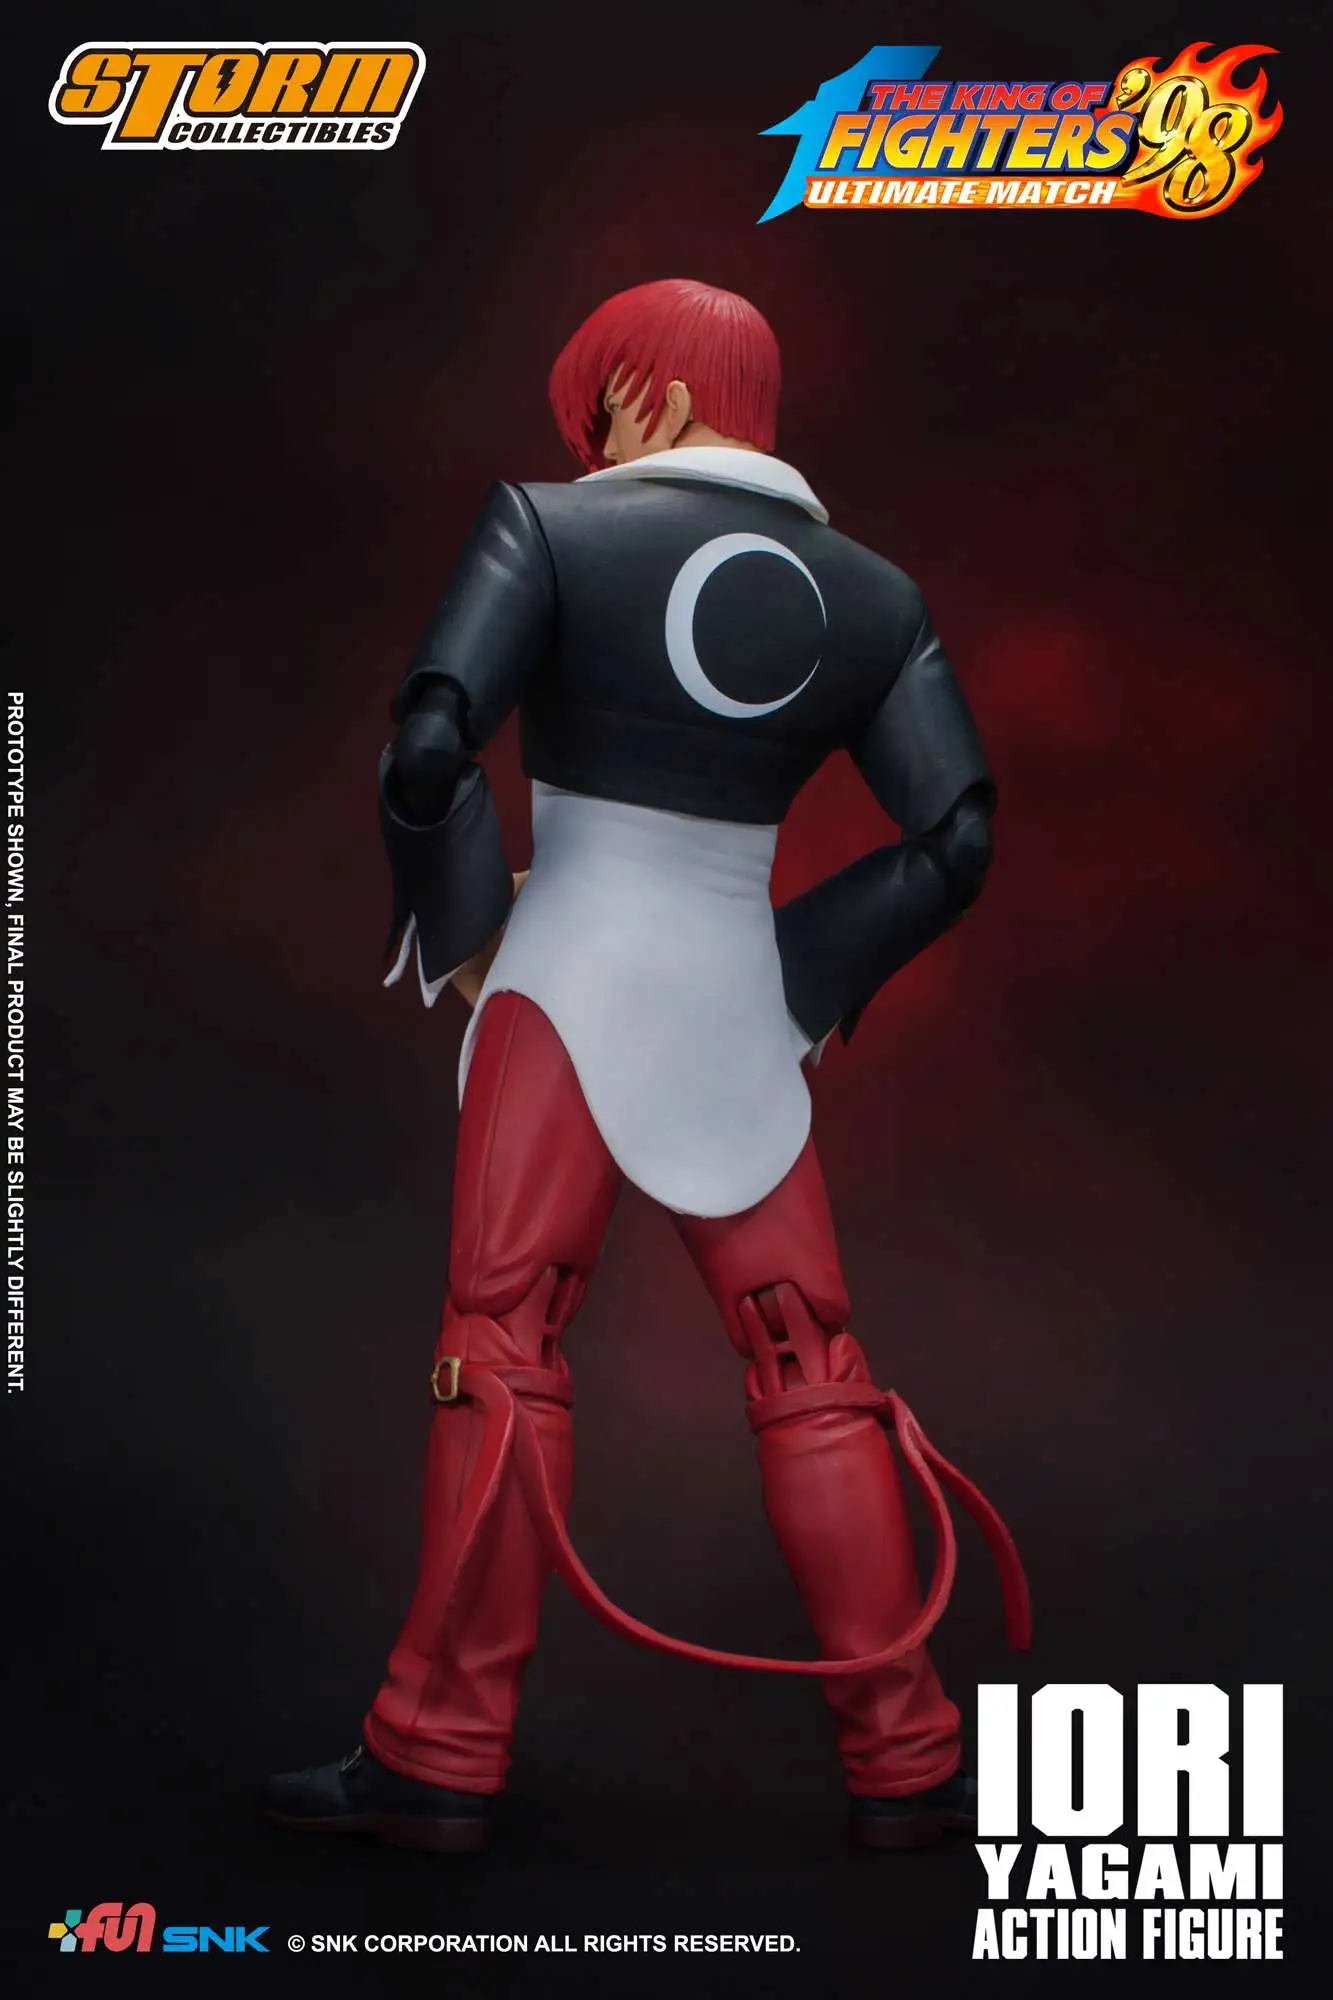 STM87129 Storm Collectibles Iori Yagami King of Fighters '98" Action Figure 